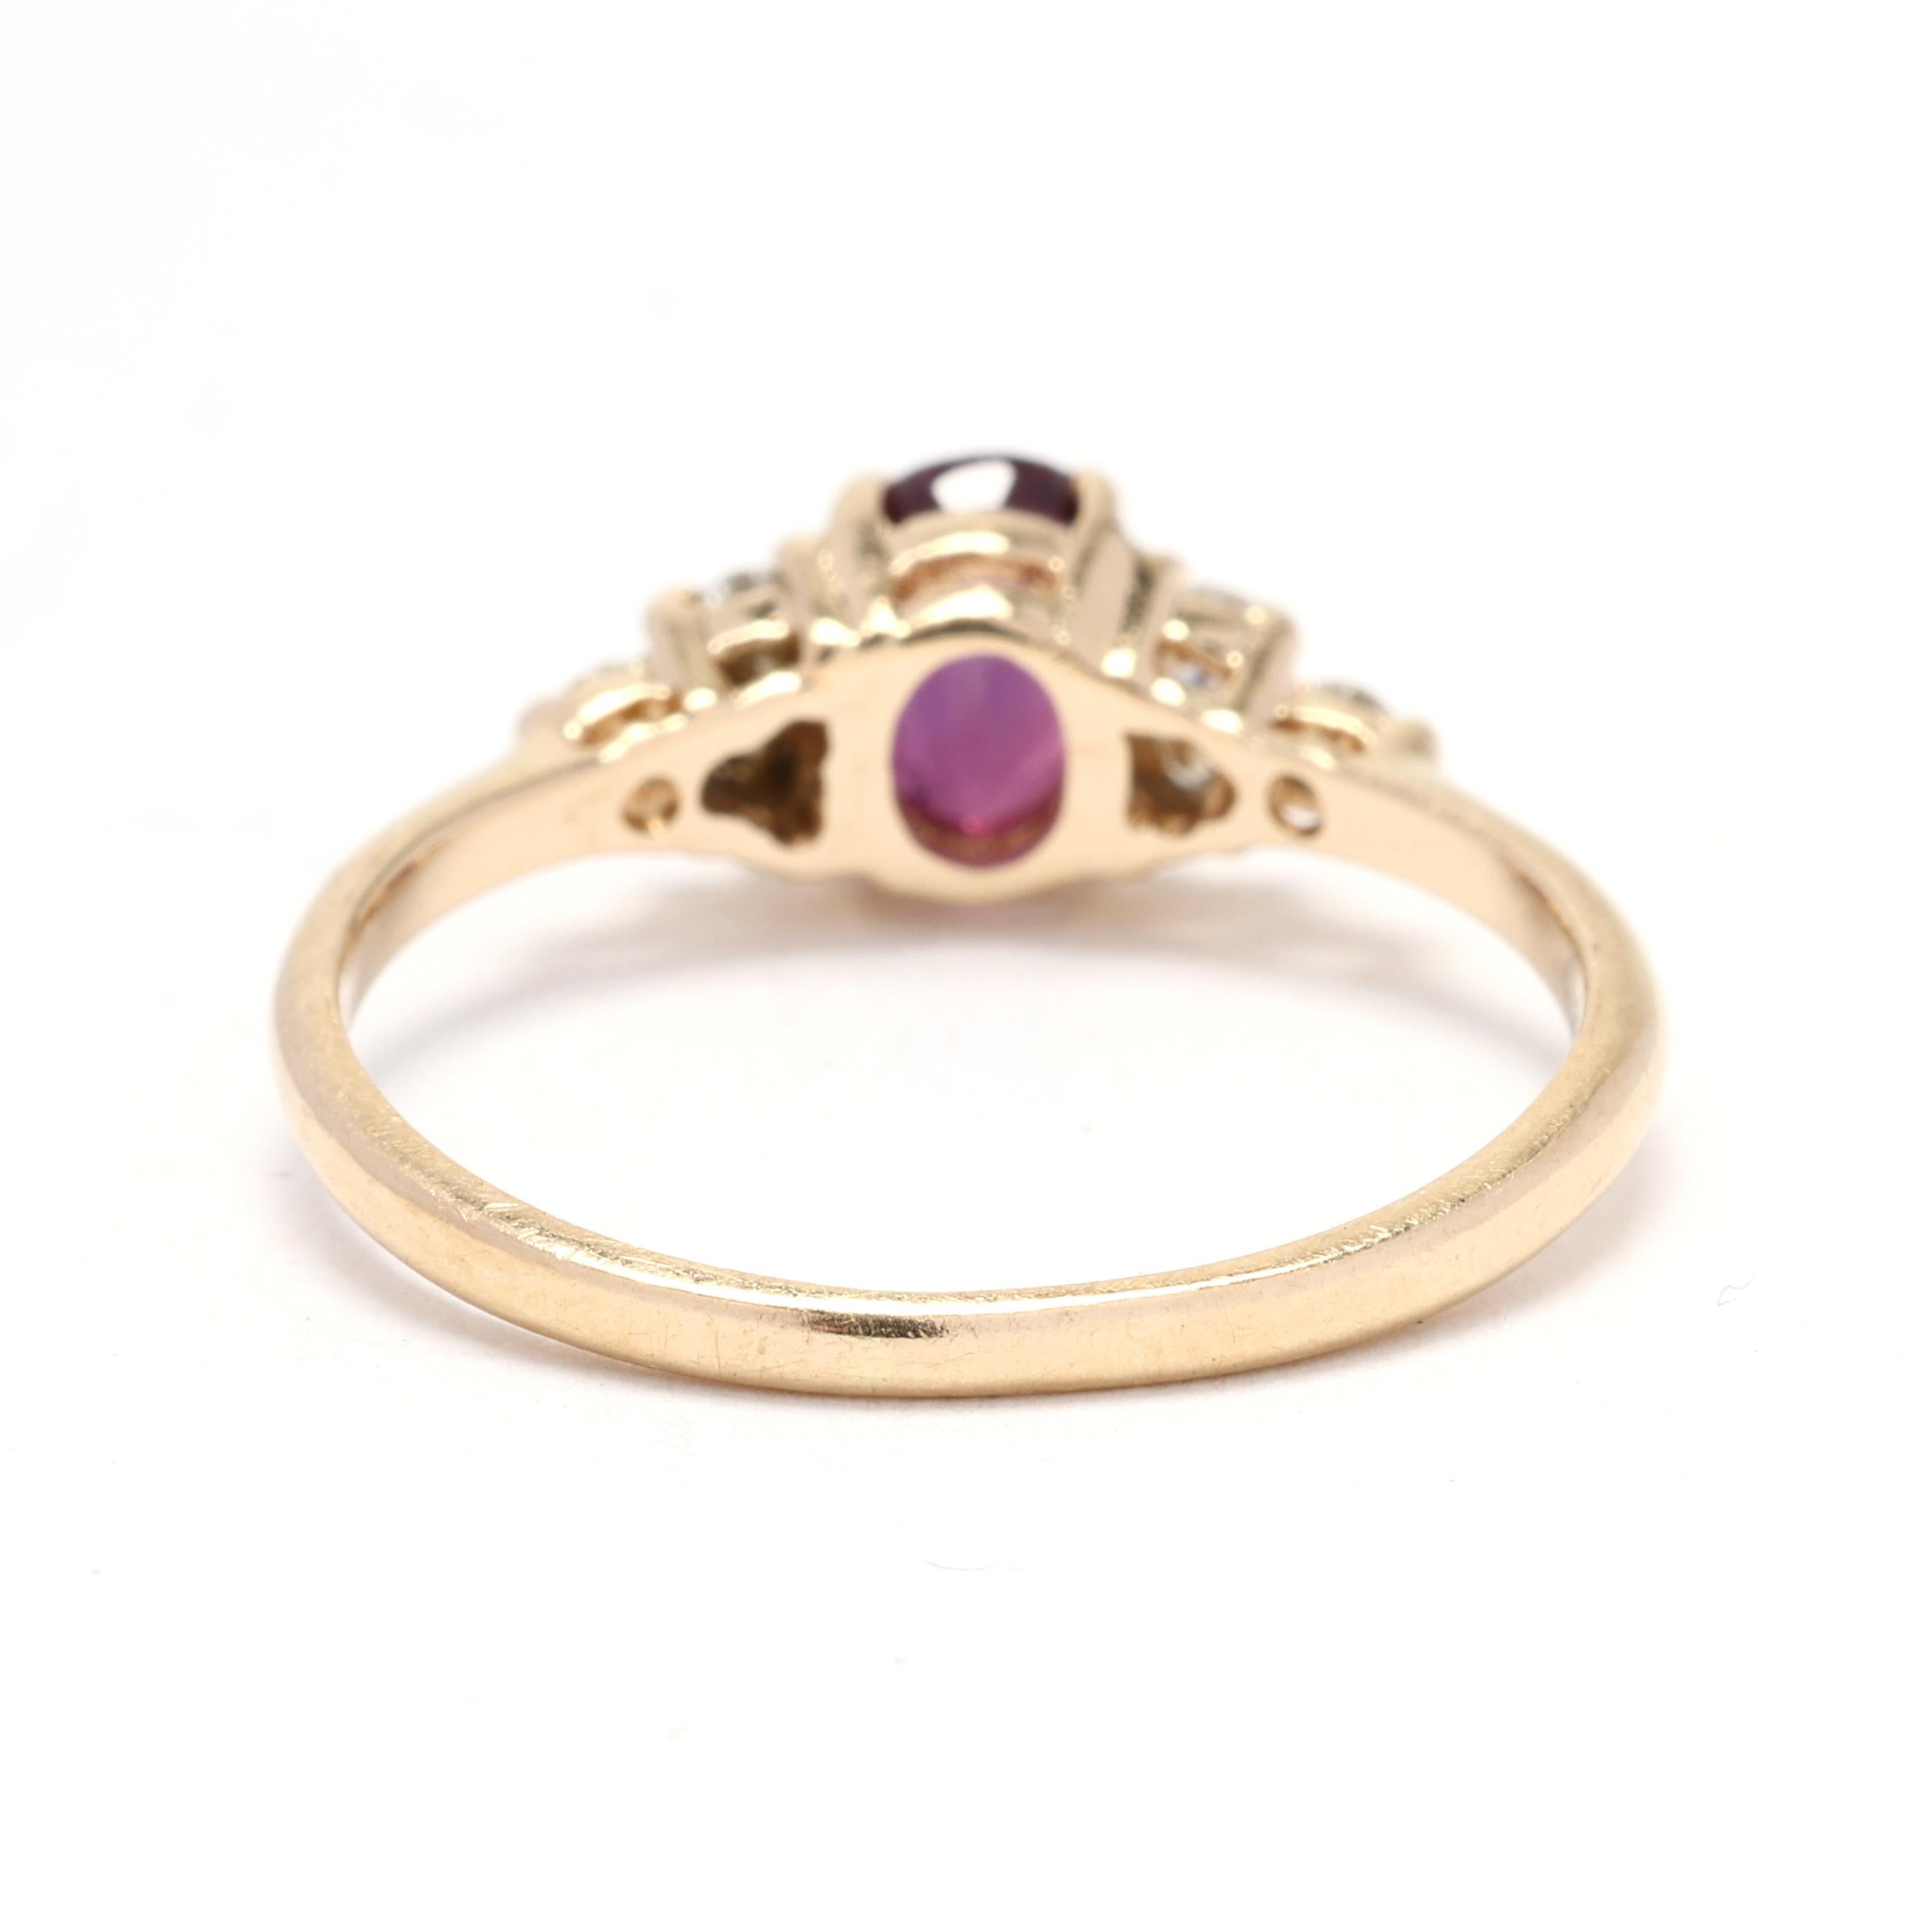 Oval Cut 0.80ctw Ruby & Diamond Engagement Ring, 14k Yellow Gold, Ring Size 4.75